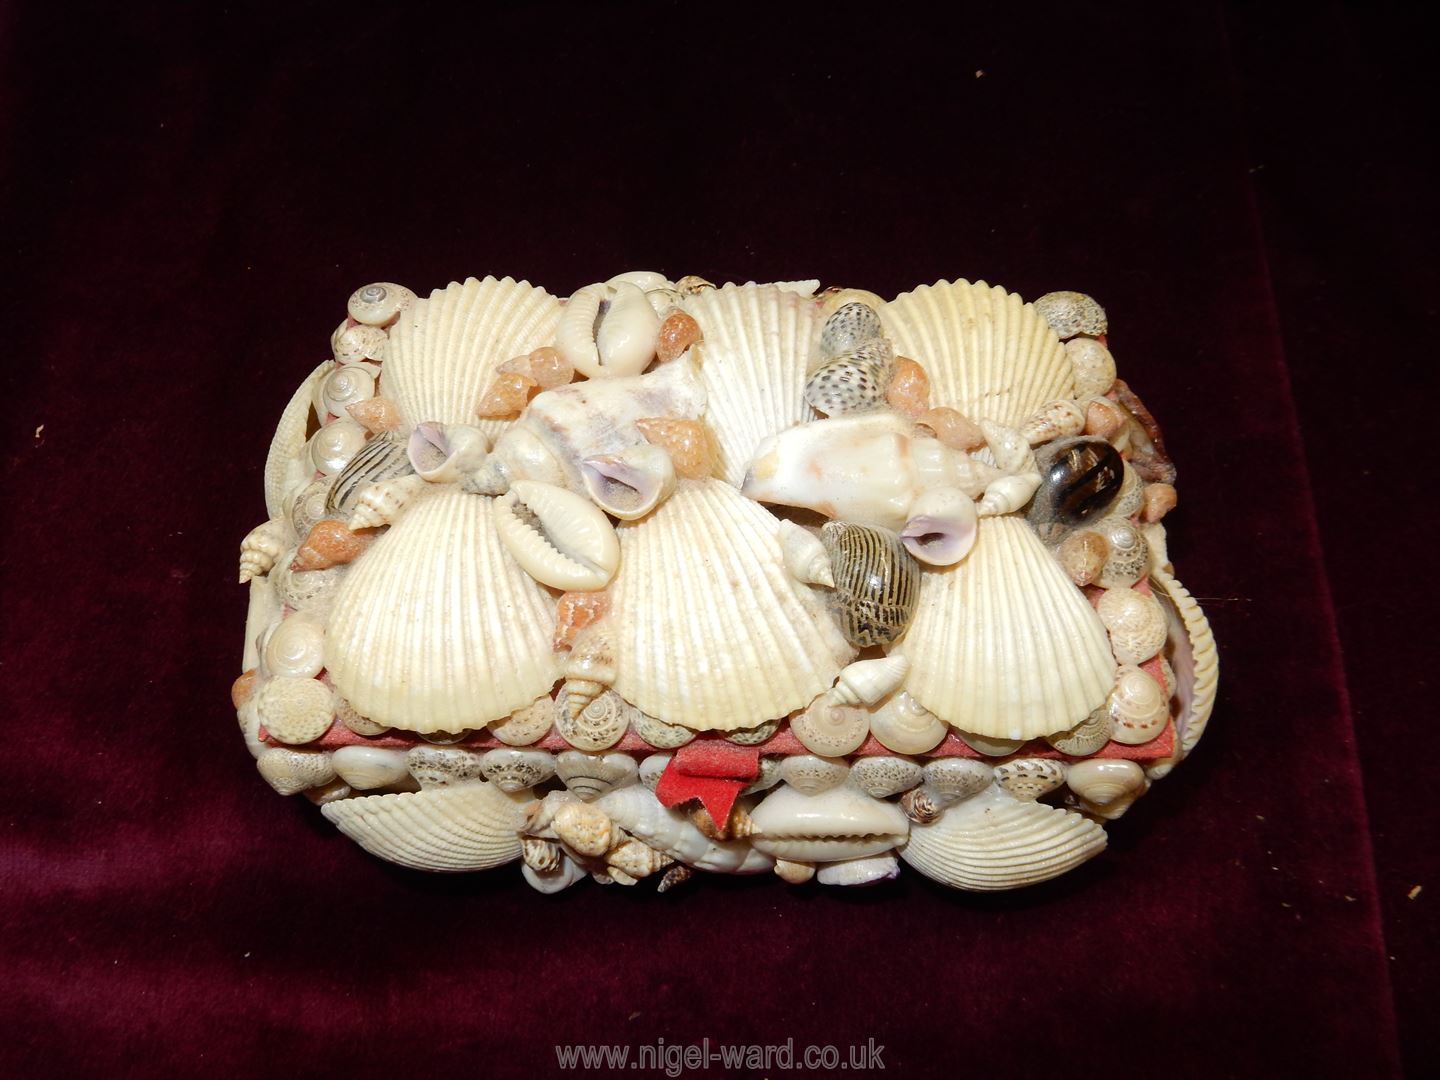 A shell encrusted jewellery box and contents of chains, floral brooches, bracelets etc. - Image 2 of 2